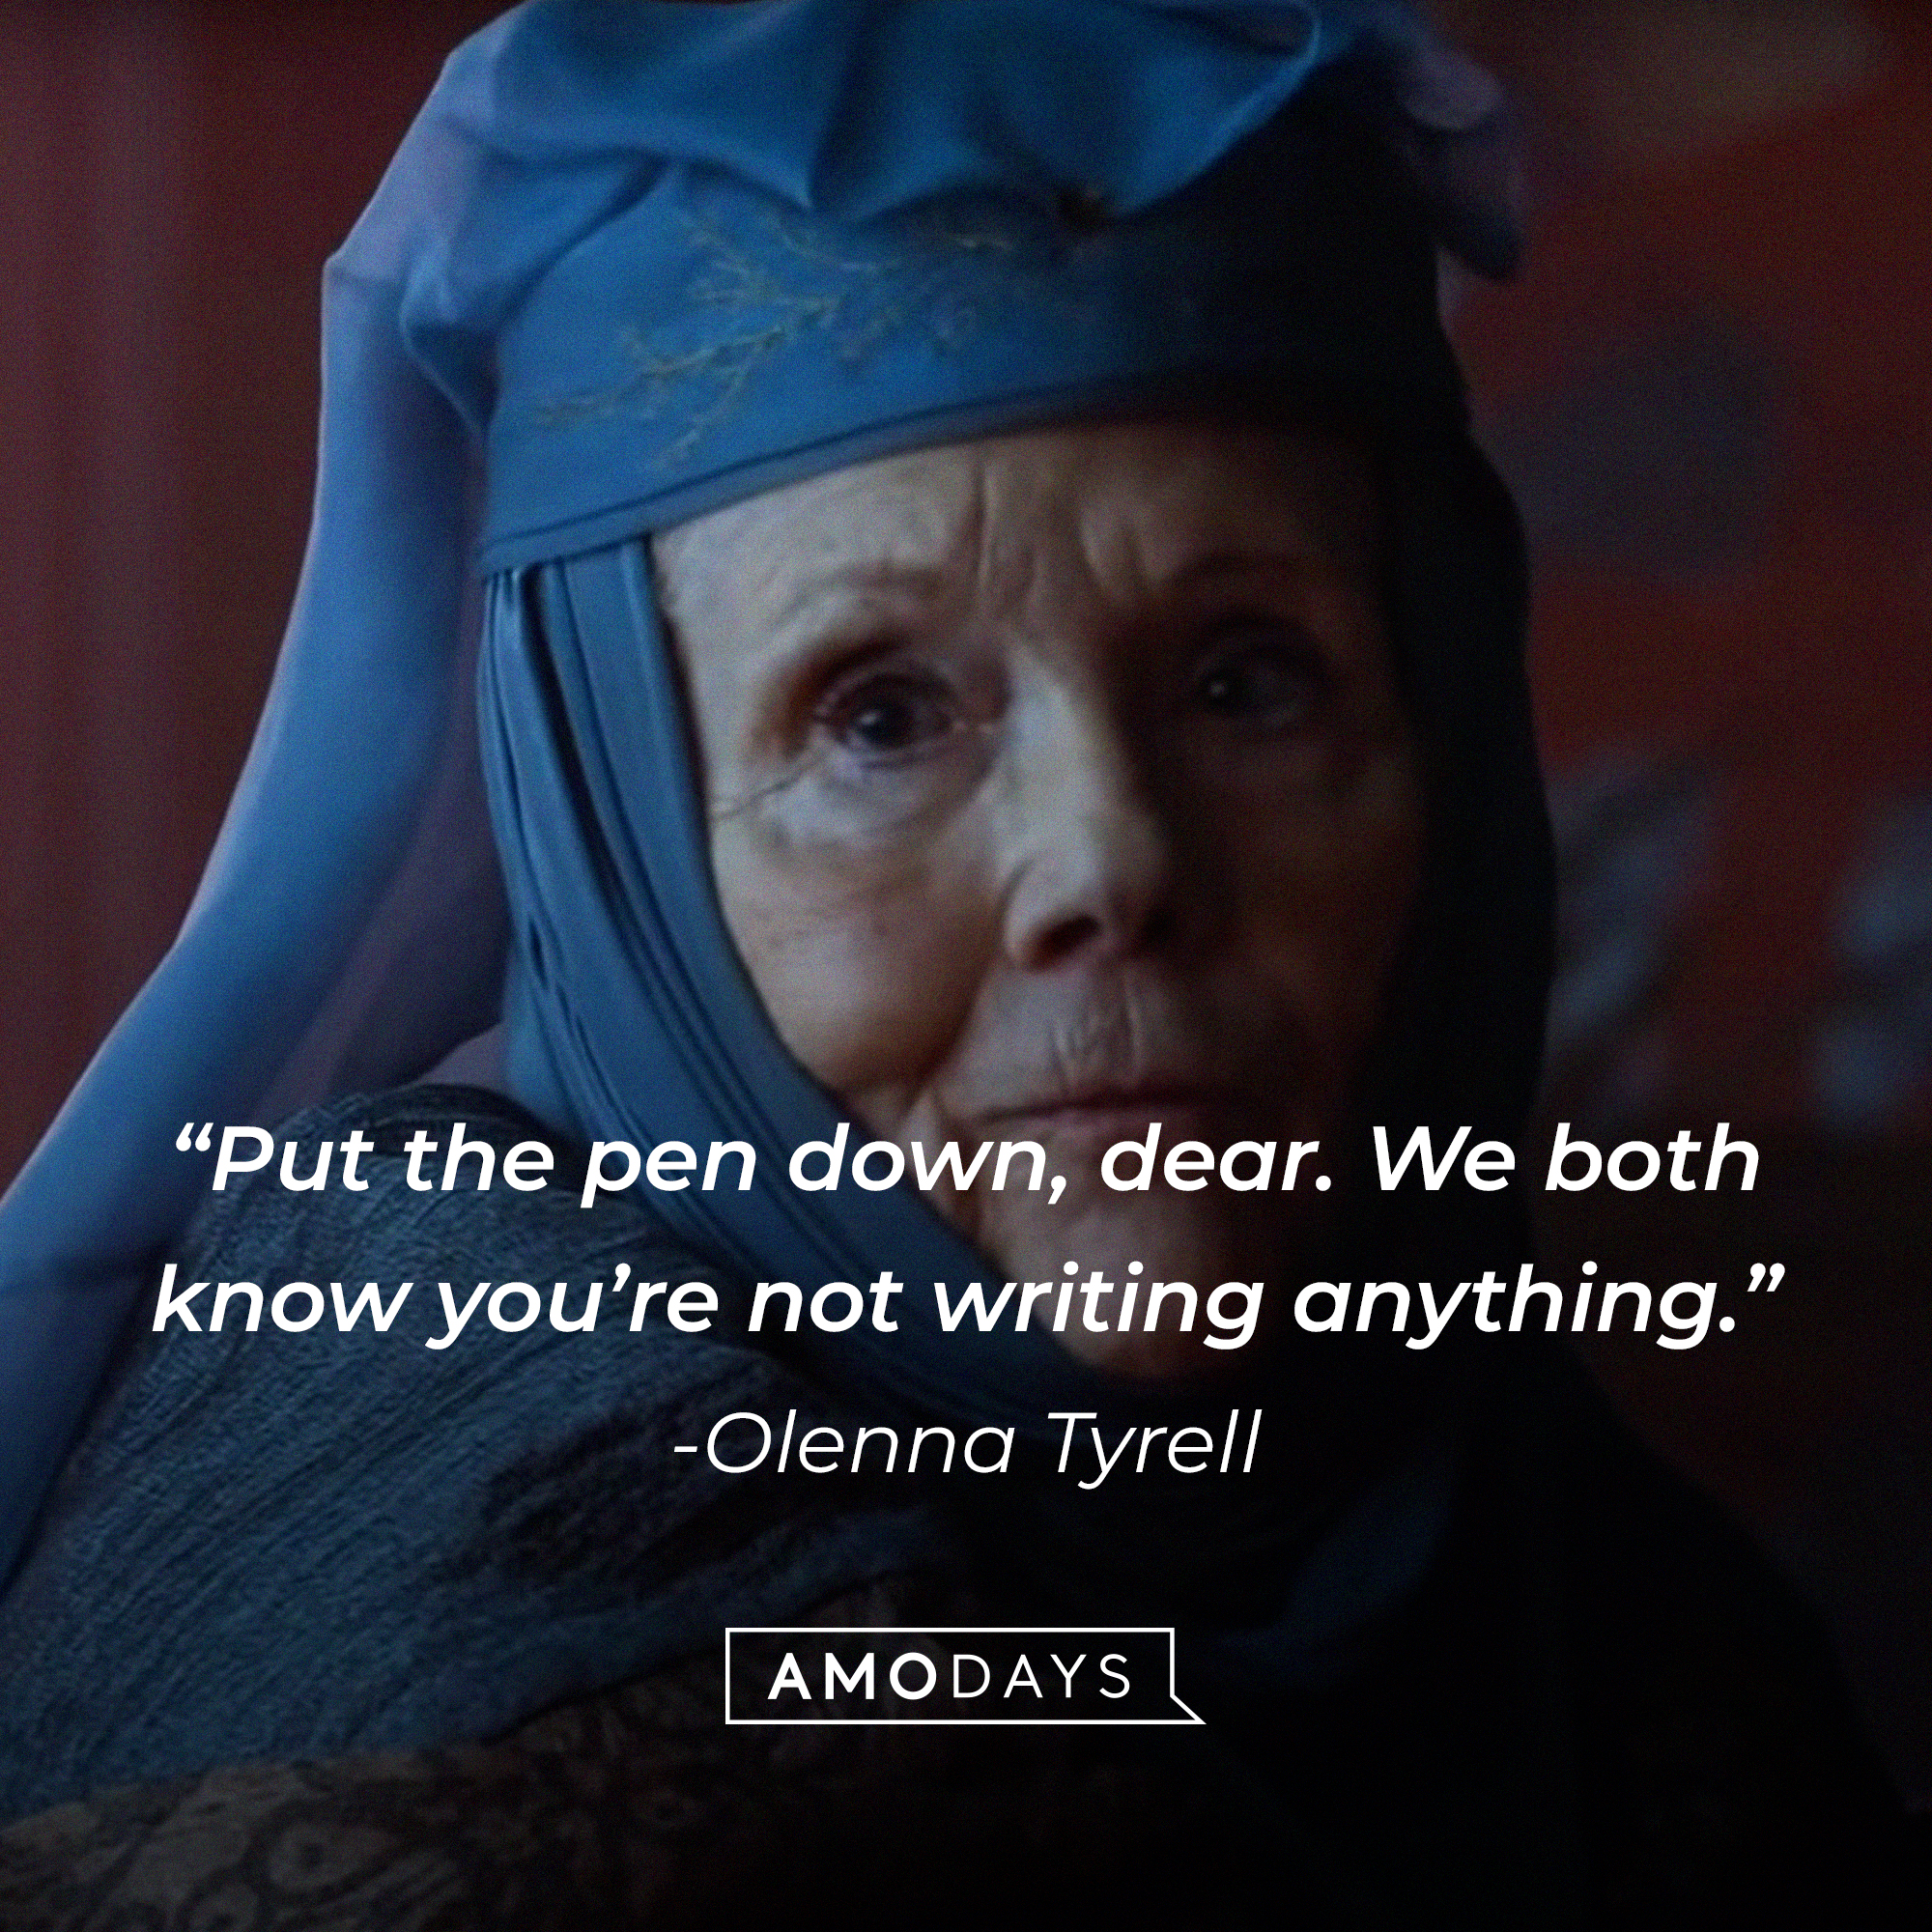 Olenna Tyrell, with her quote: “Put the pen down, dear. We both know you’re not writing anything.” │Source: facebook.com/GameOfThrones